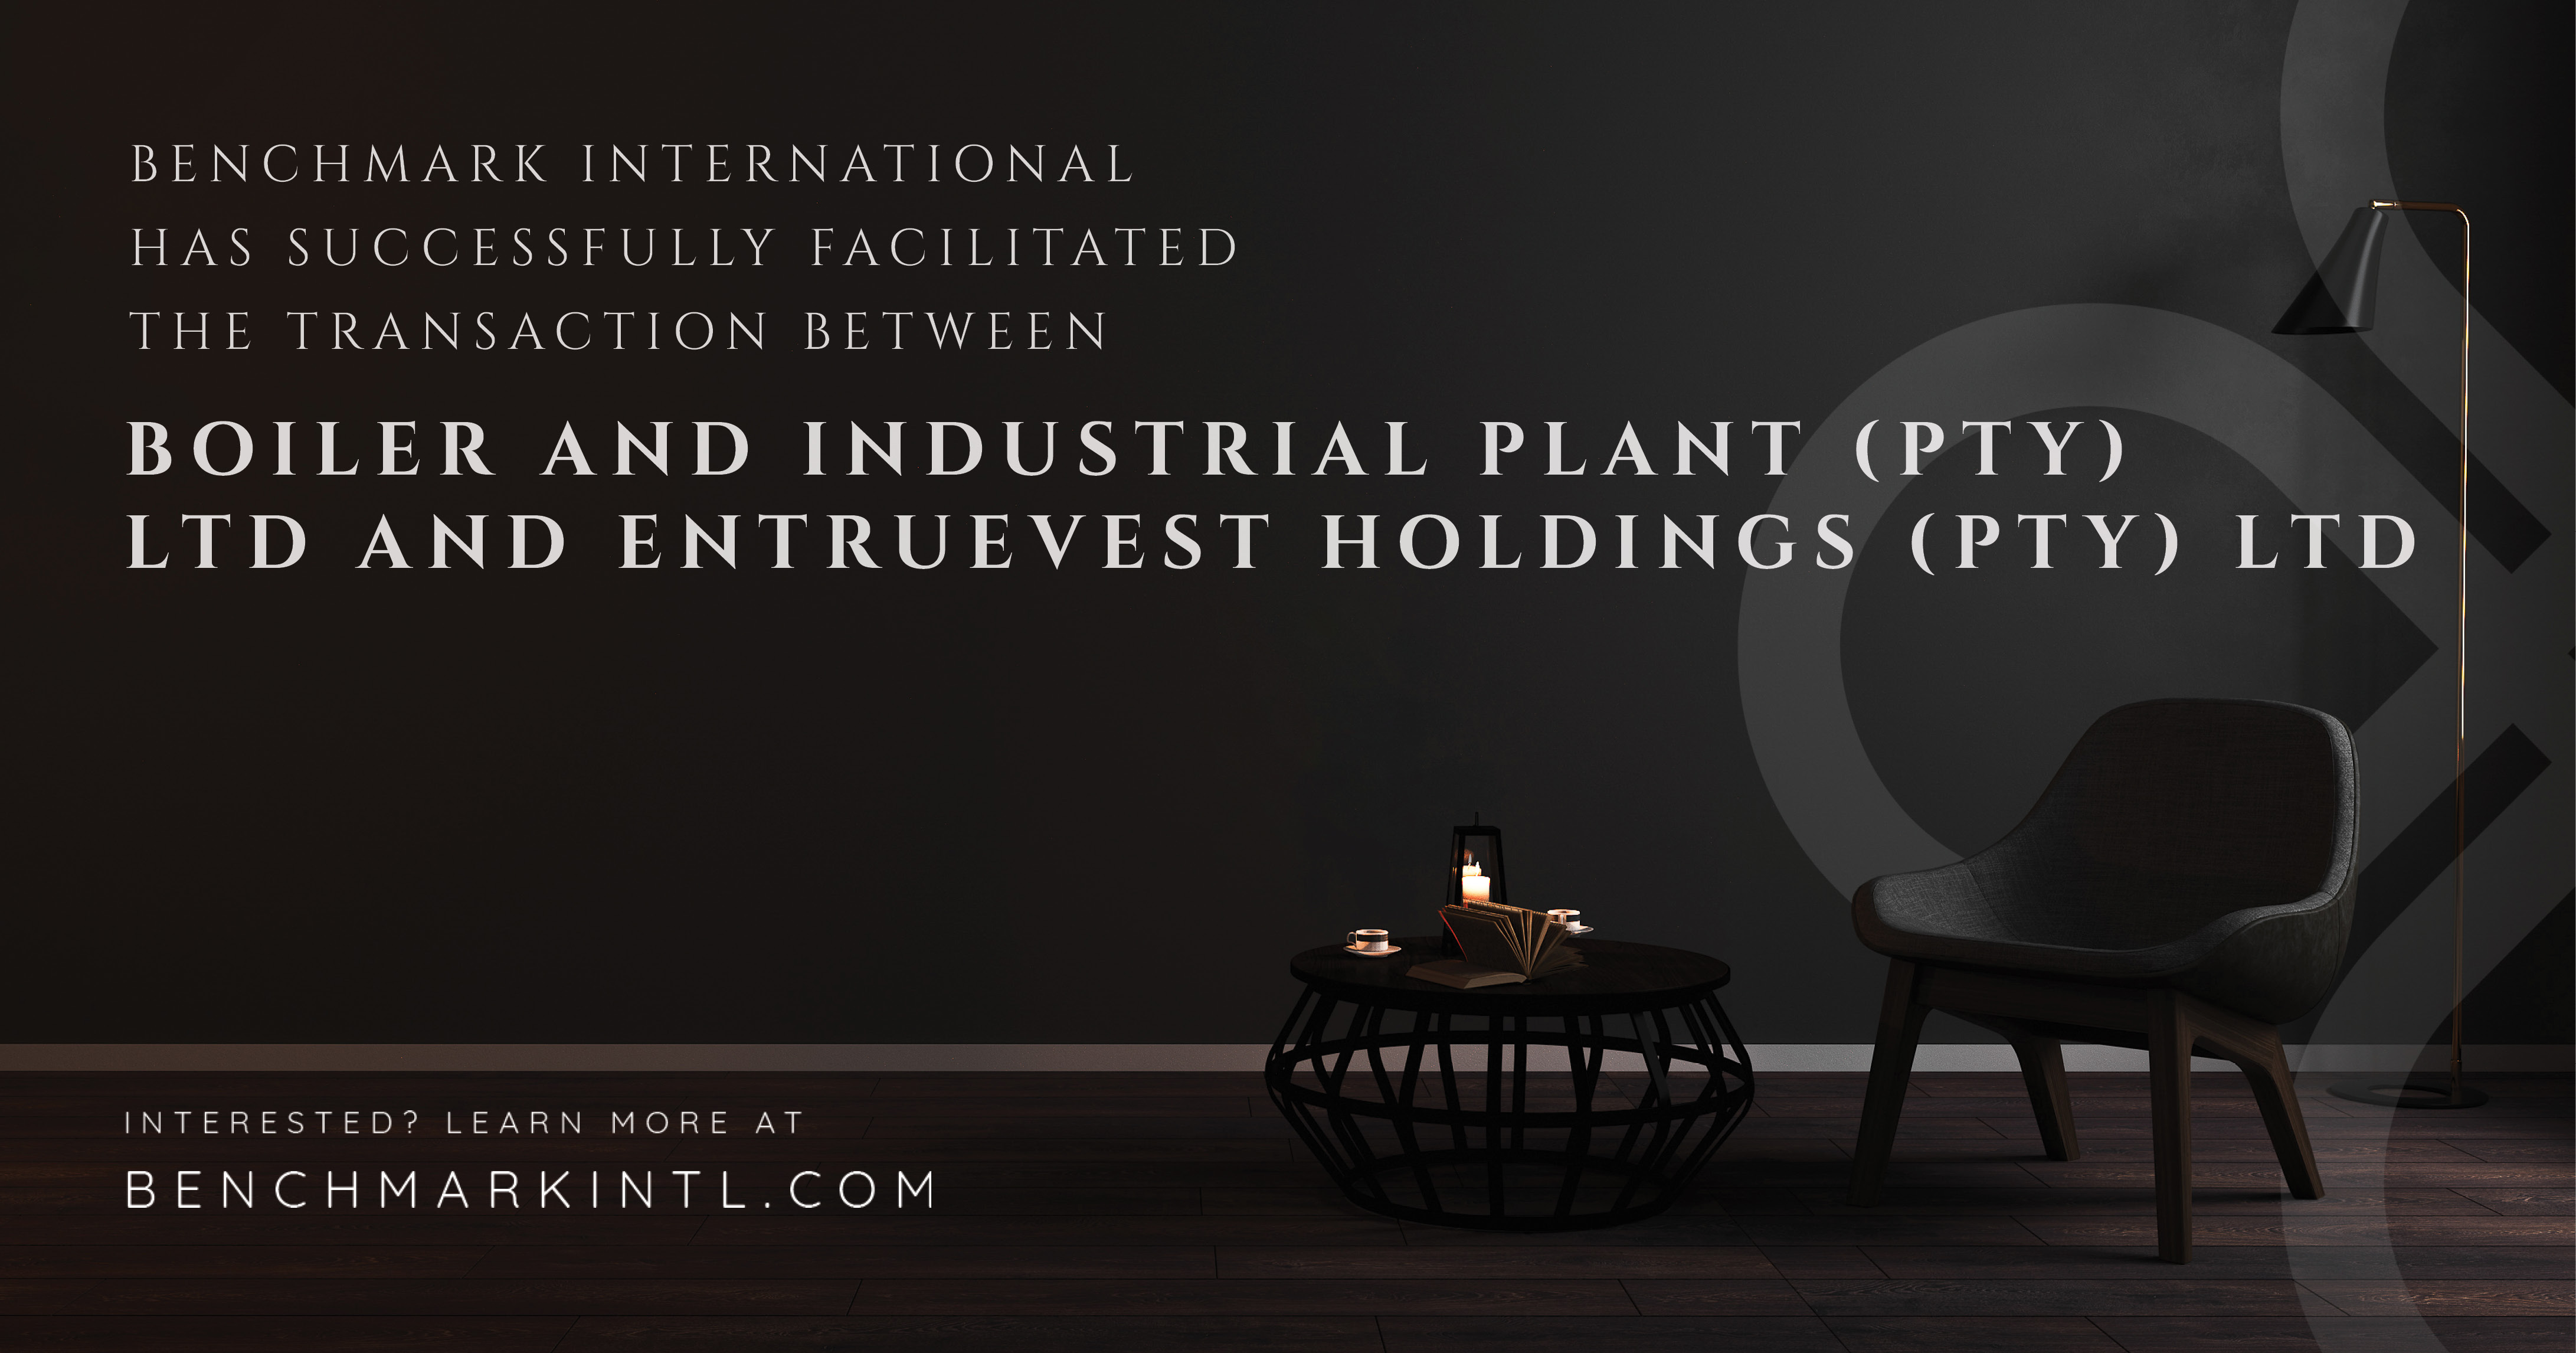 Benchmark International Has Successfully Facilitated The Transaction Between Boiler Industrial Plant (Pty) Ltd And Entruevest Holdings (Pty) Ltd